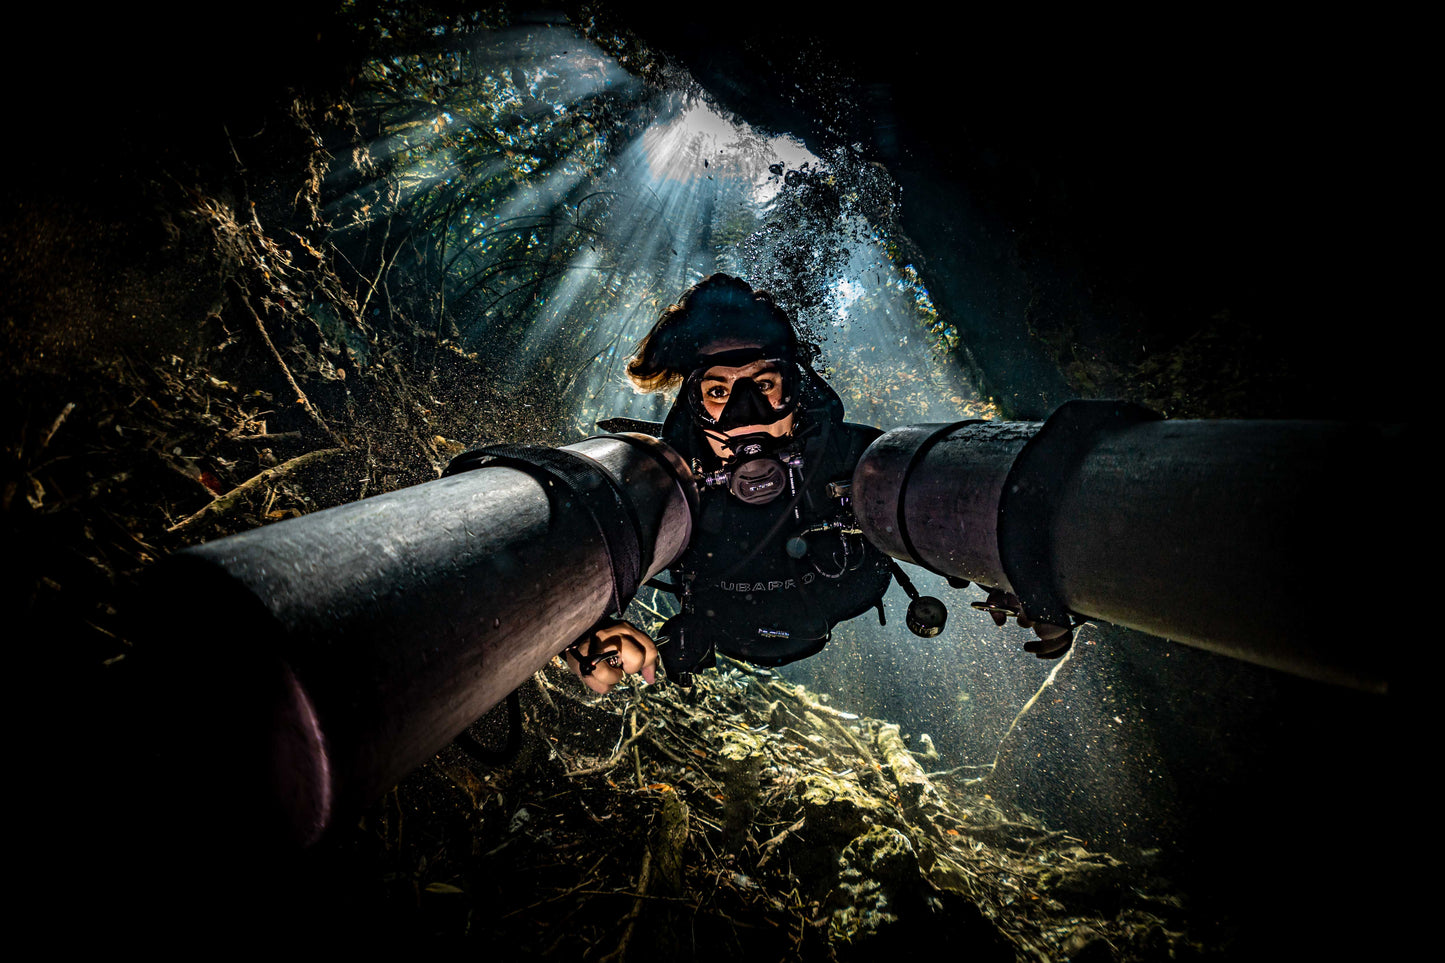 Cenote Diving - Two dives